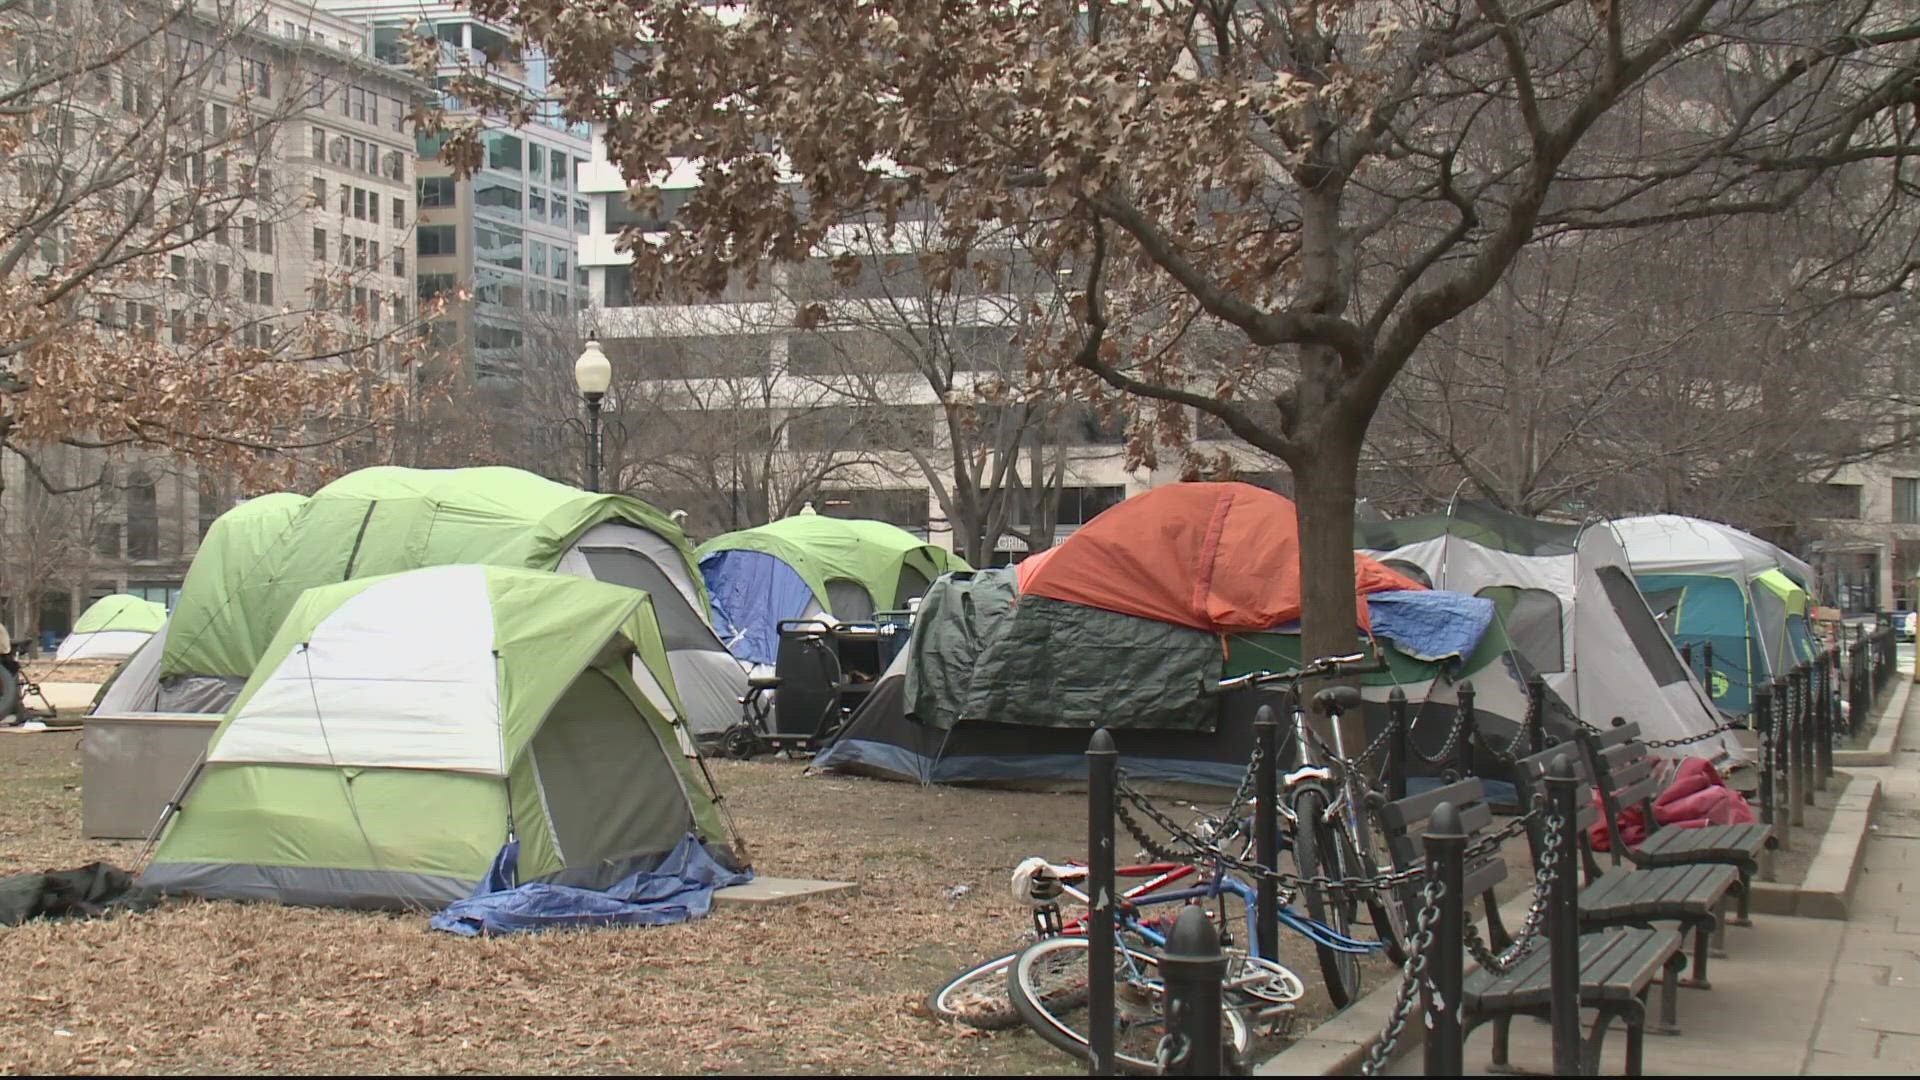 The homeless encampment in McPherson Square will be no more. But where will all the people living there go next?